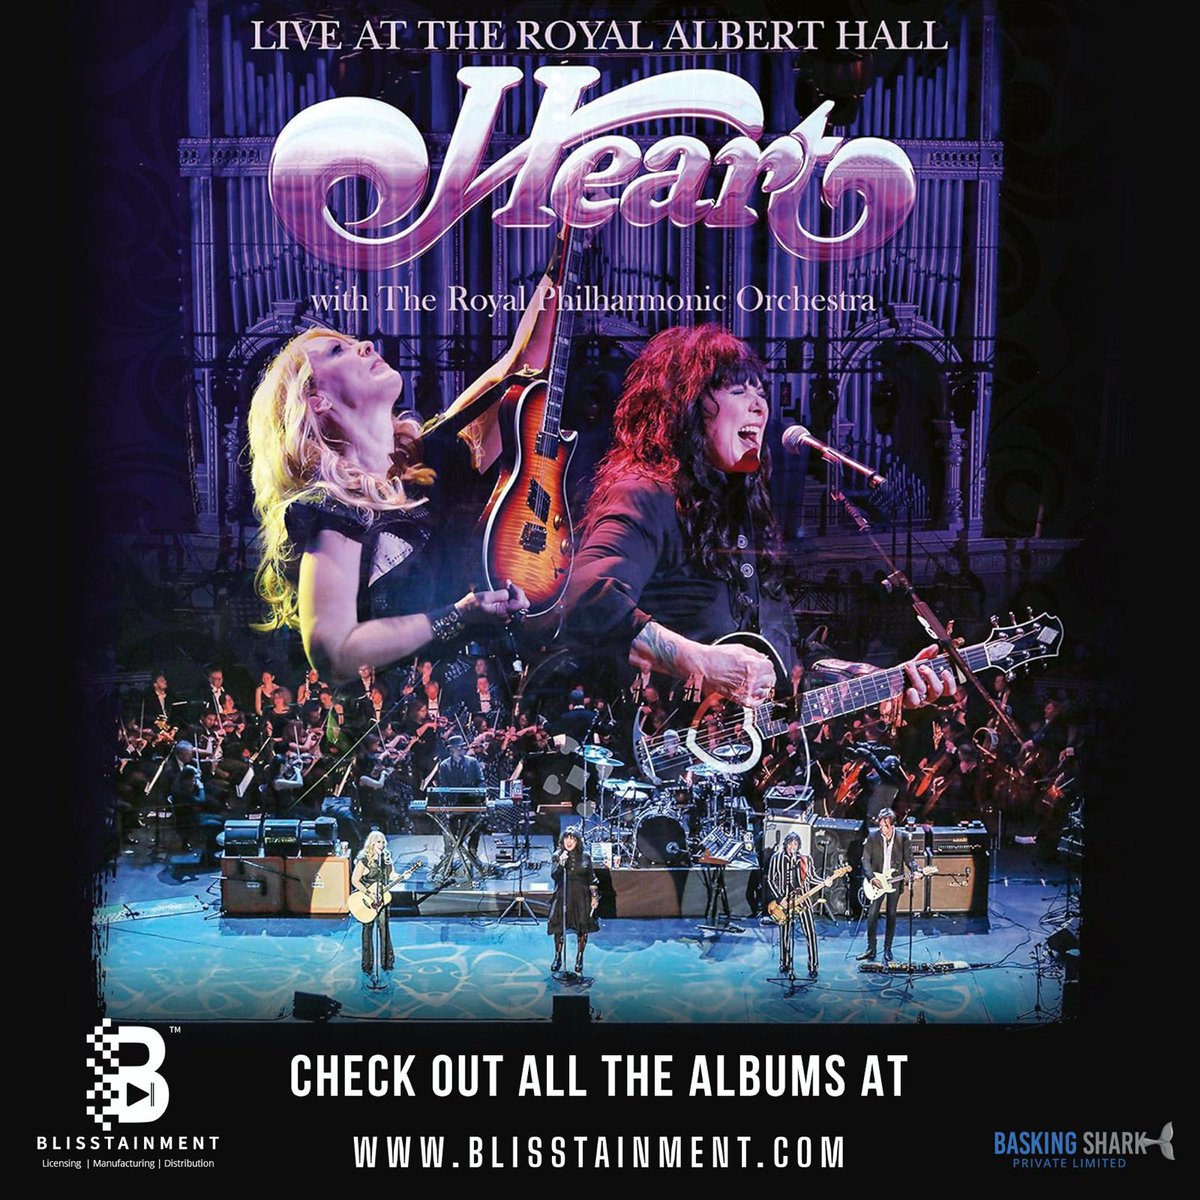 Get ready for a musical journey like no other with Heart Live at the Royal Albert Hall! Discover it exclusively at blisstaiment.com

#HeartLive #RoyalAlbertHall #Blisstainment #MusicJourney #ExclusiveEvent #LiveConcert #MusicalExperience #RockMusic #OnlineEntertainment